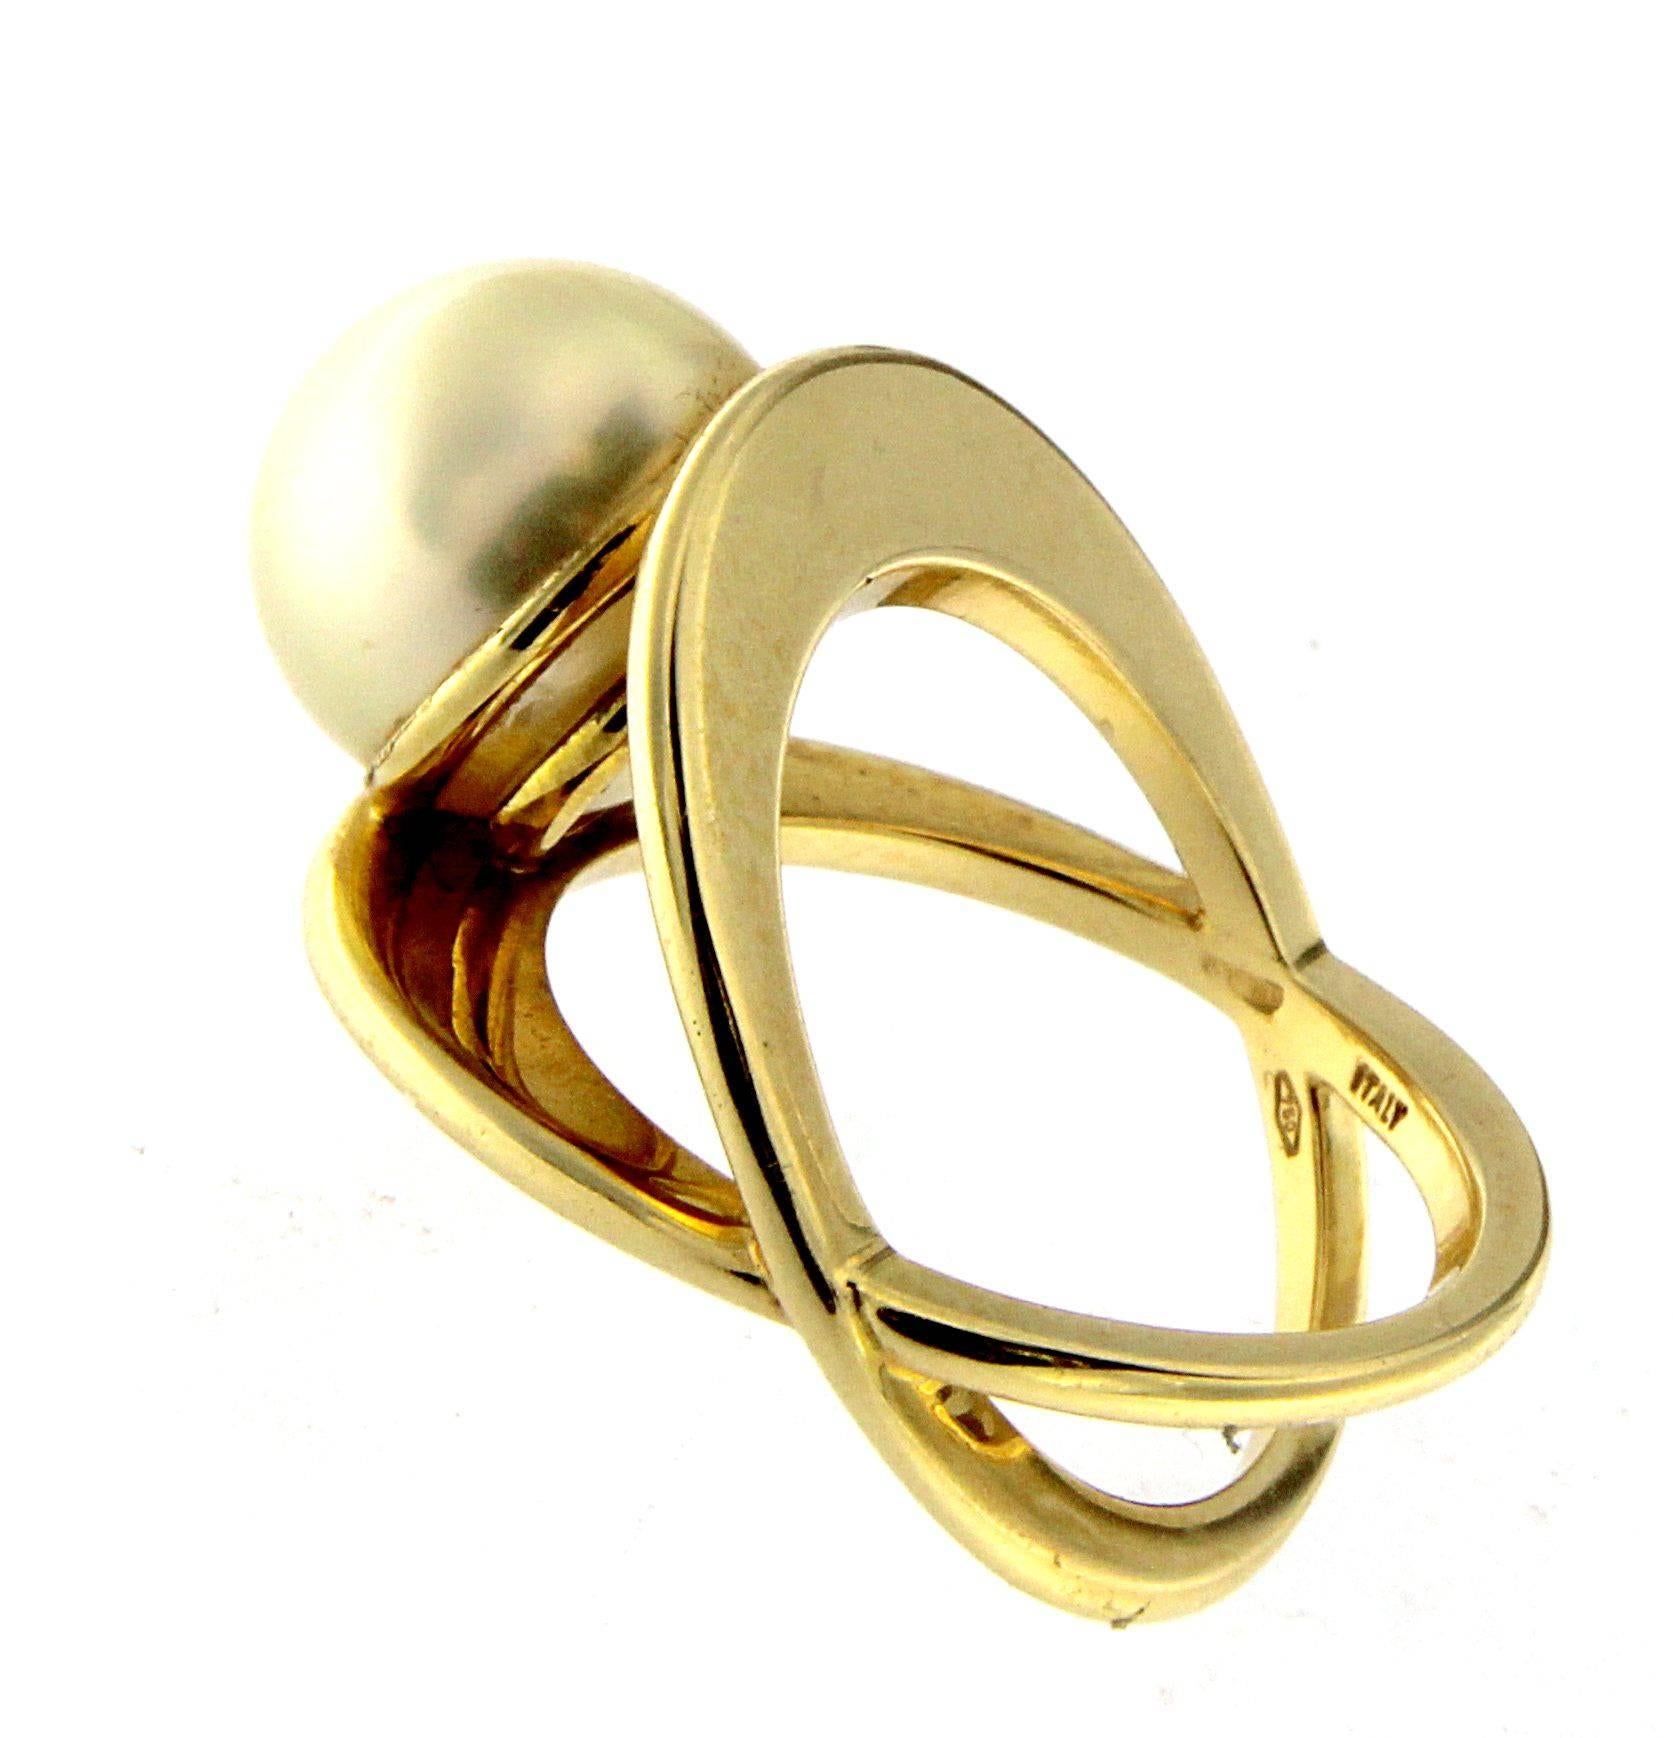 This Ring has been created for a design competition in 2000
Designed by the great Vanessa Drumond has arrived in the final
The wonderful Pearl has a light and a perfection of sphericalness that make it truly precious
Gold weight in 18 kt gr